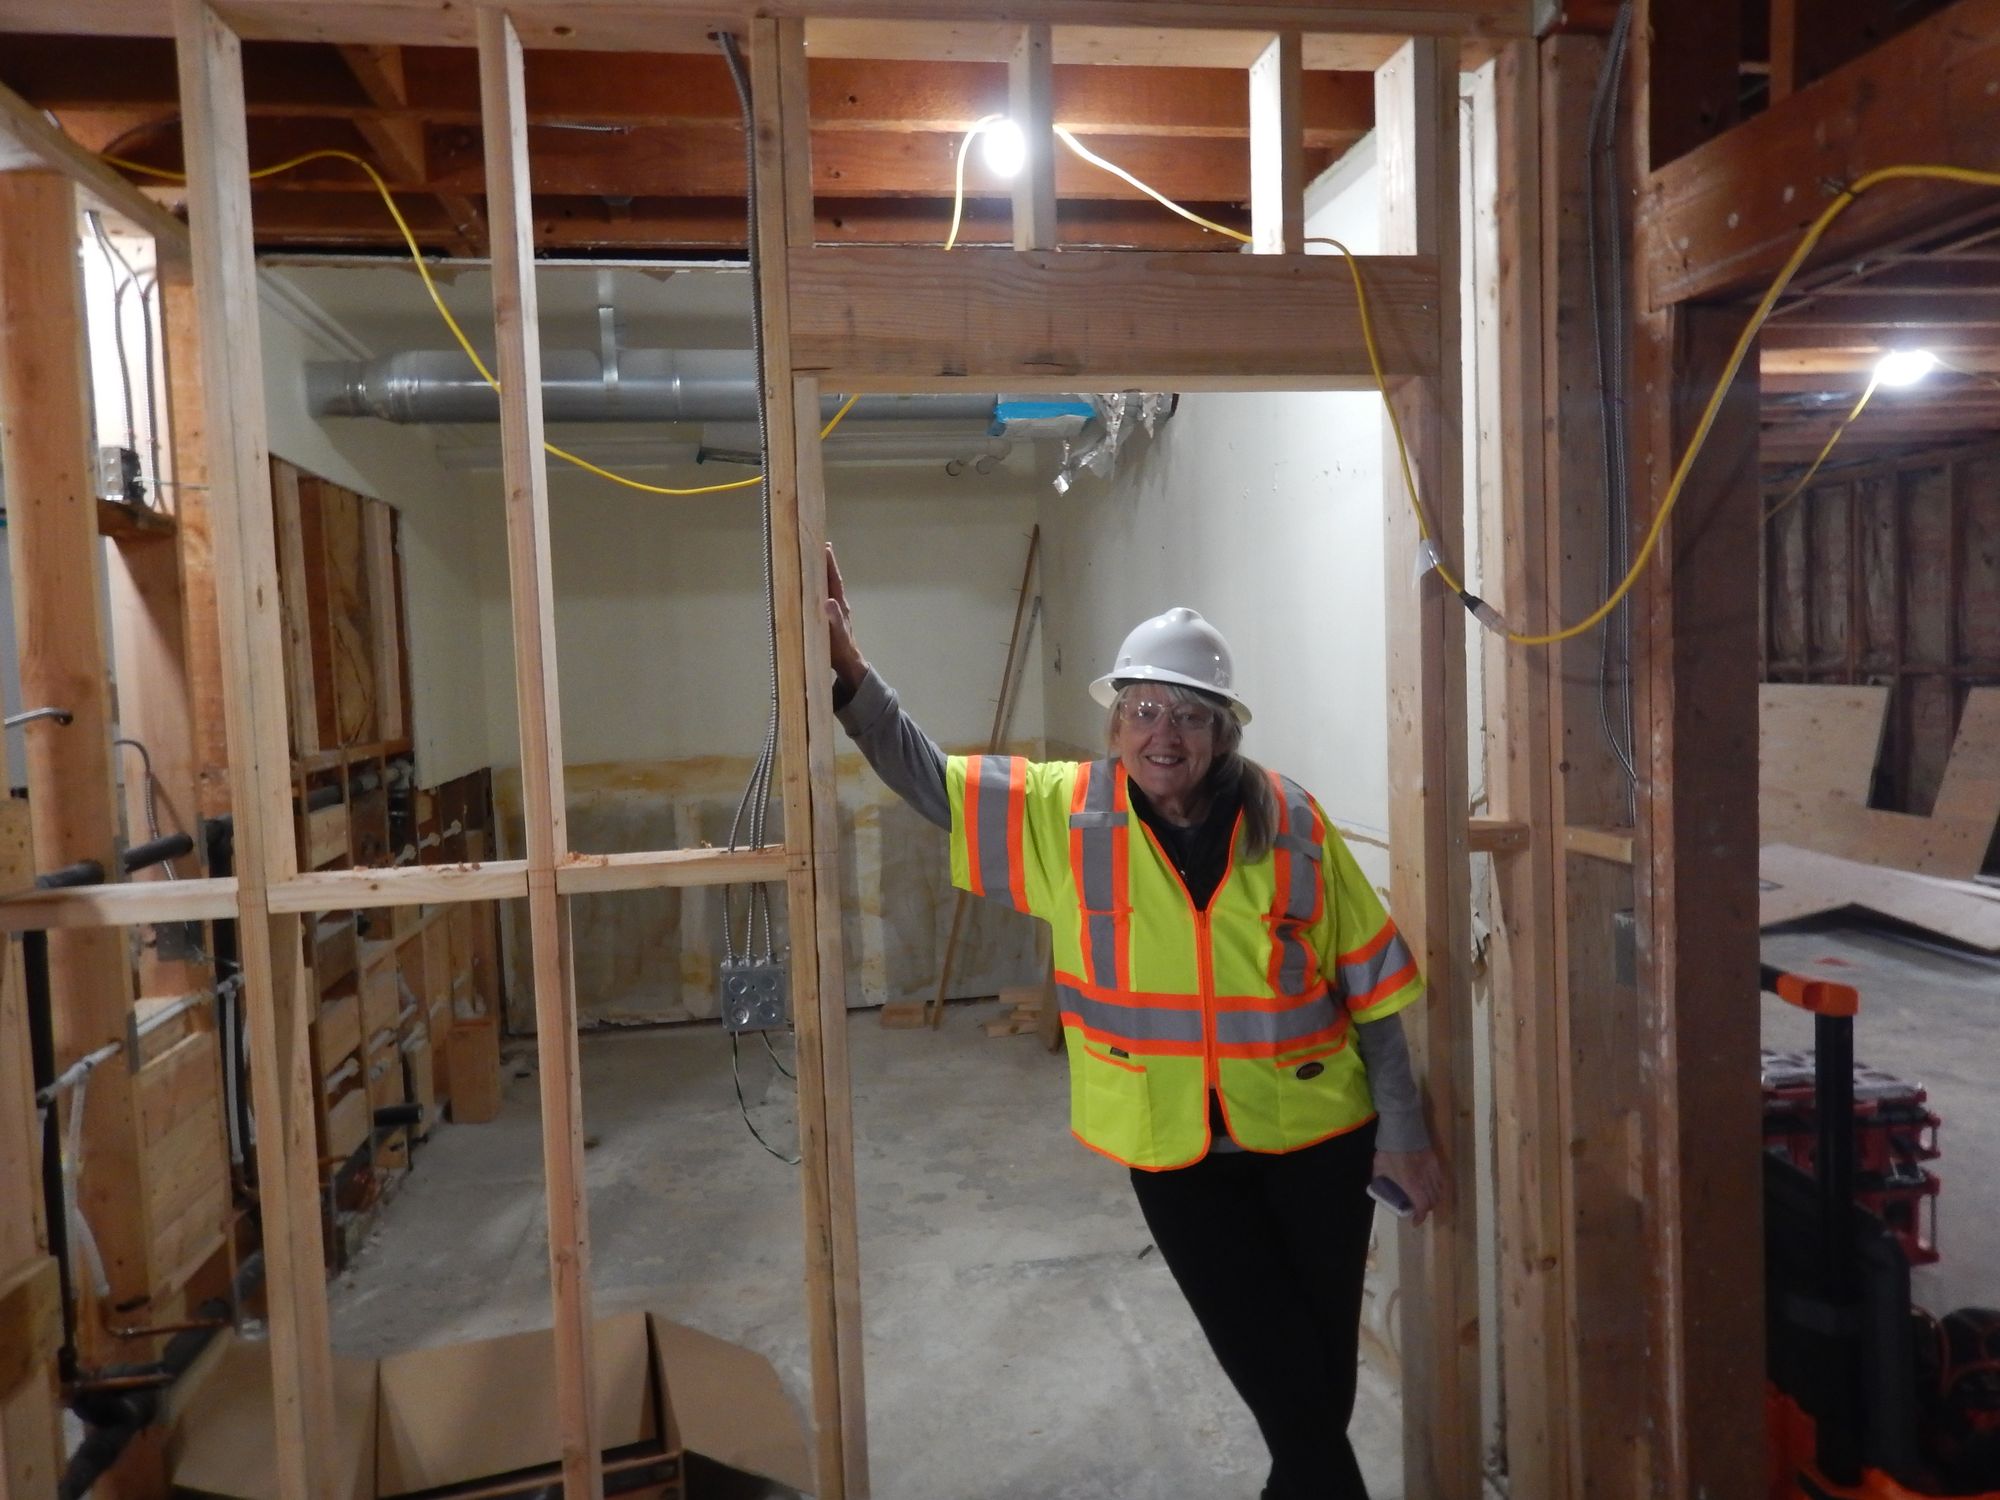 Supervisor Heuer in the demolished interior of the Downieville Community Center. Photo by Billy Epps